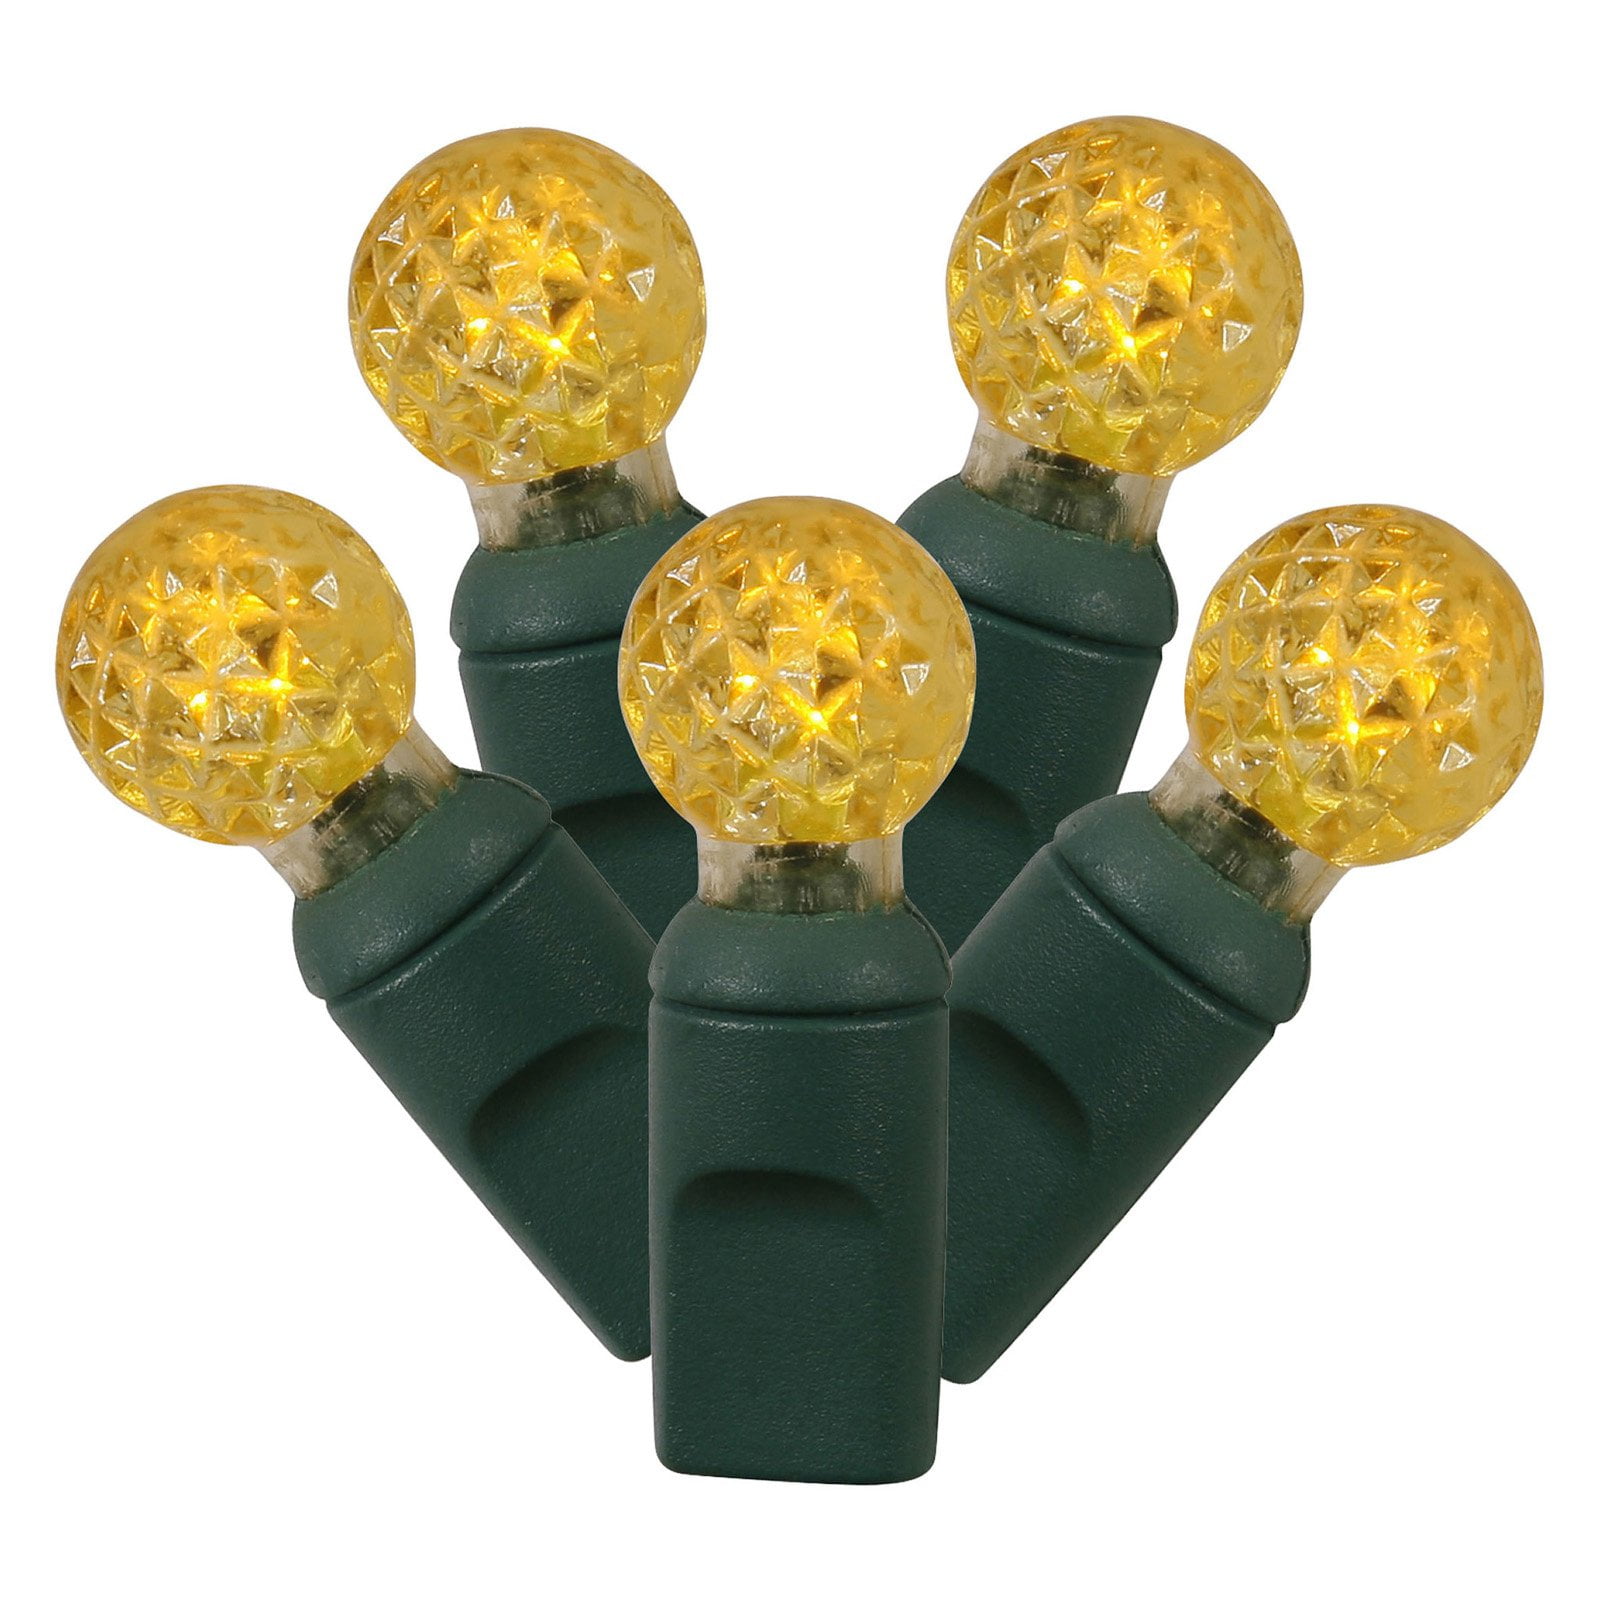 Vickerman 50 ct. Yellow G12 LED Lights with Green Wire - Walmart.com ...